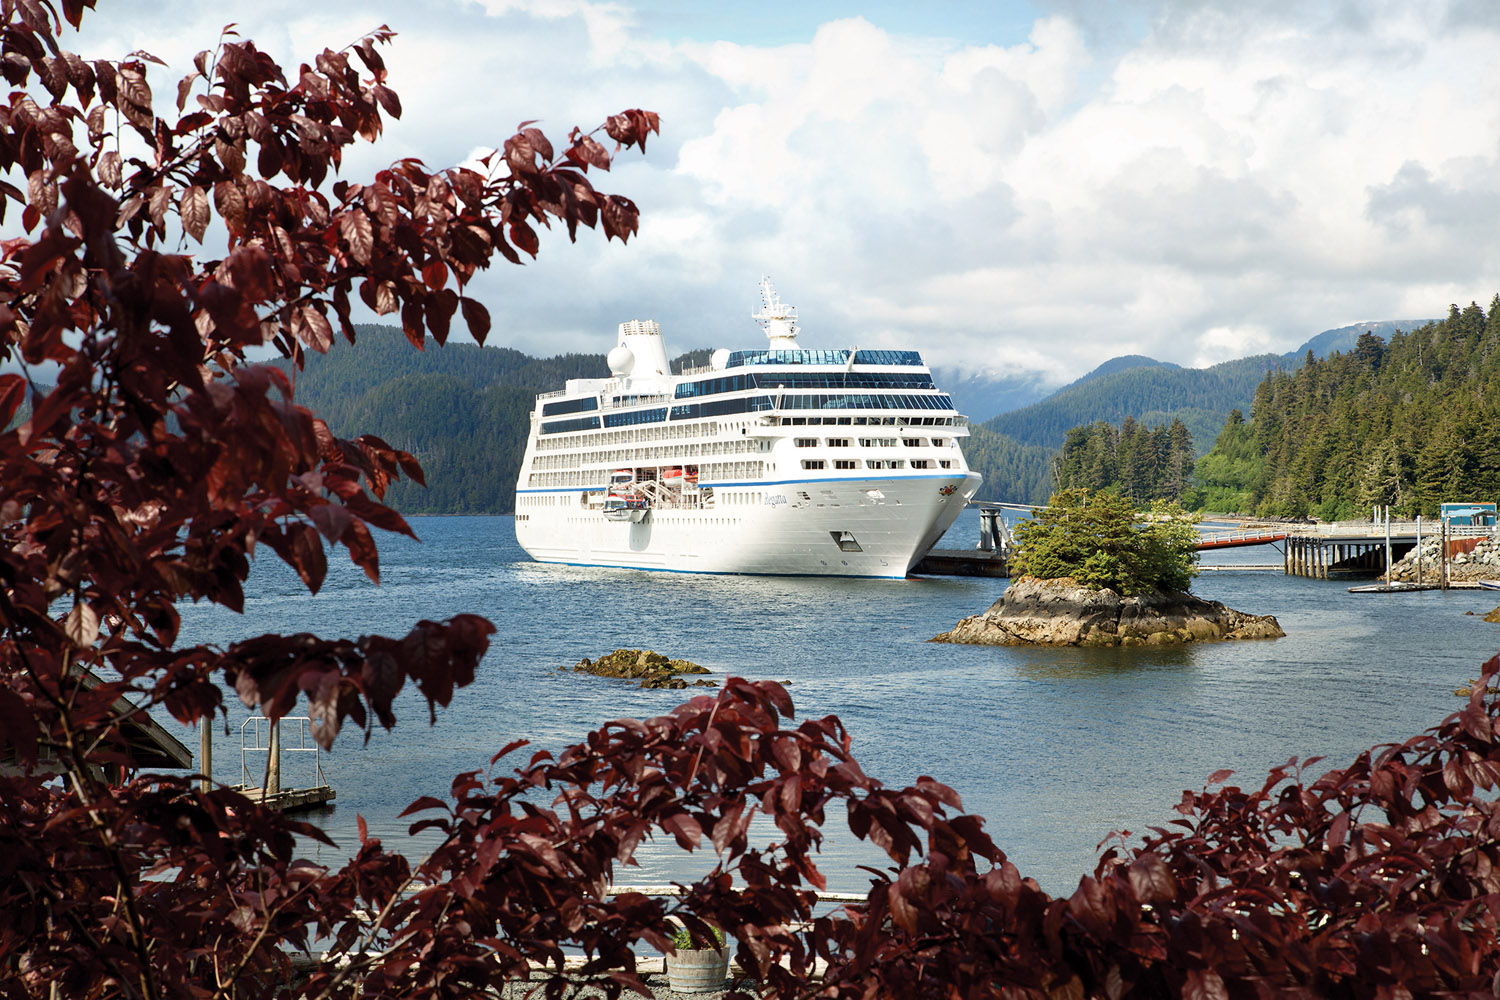 Oceania Cruises is offering a wave of savings on all 2017-2018 sailings.